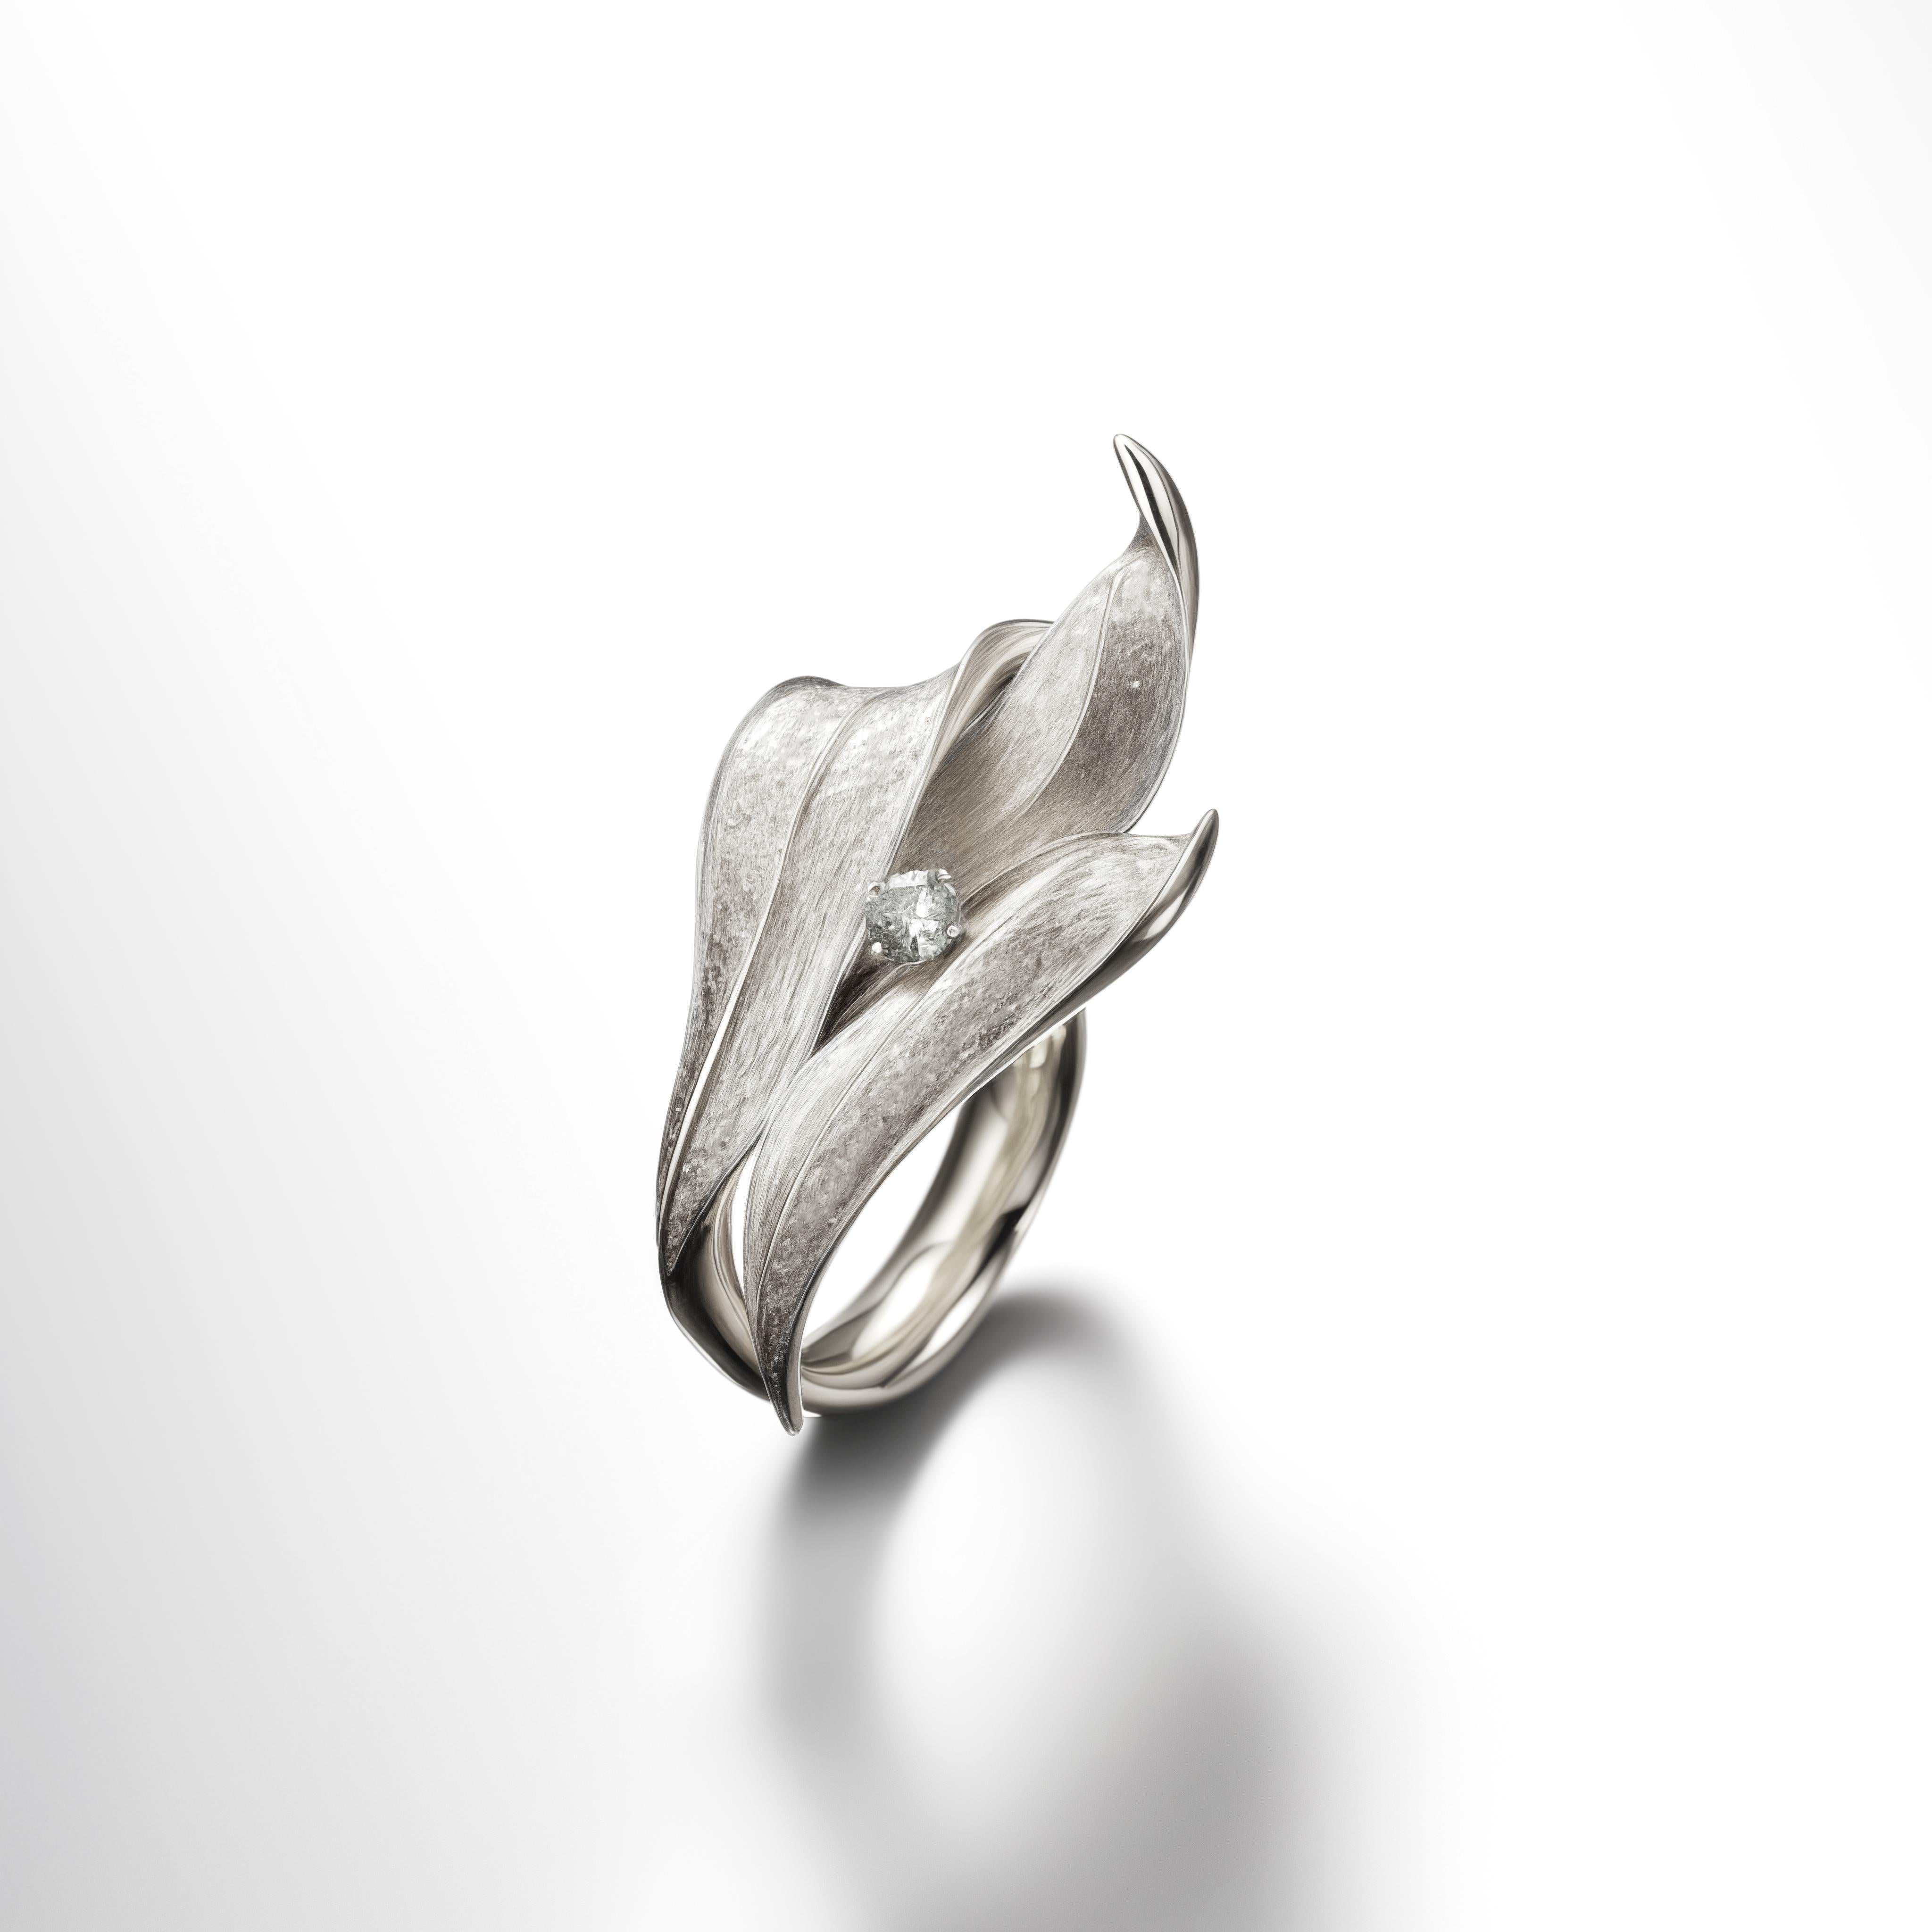 This contemporary Lily of The Valley Engagement Ring is made of 18 karat white gold and one round white sapphire. It has a sculptural shape. We work with German gems companies that have been in business since the 19th century. The ring can be